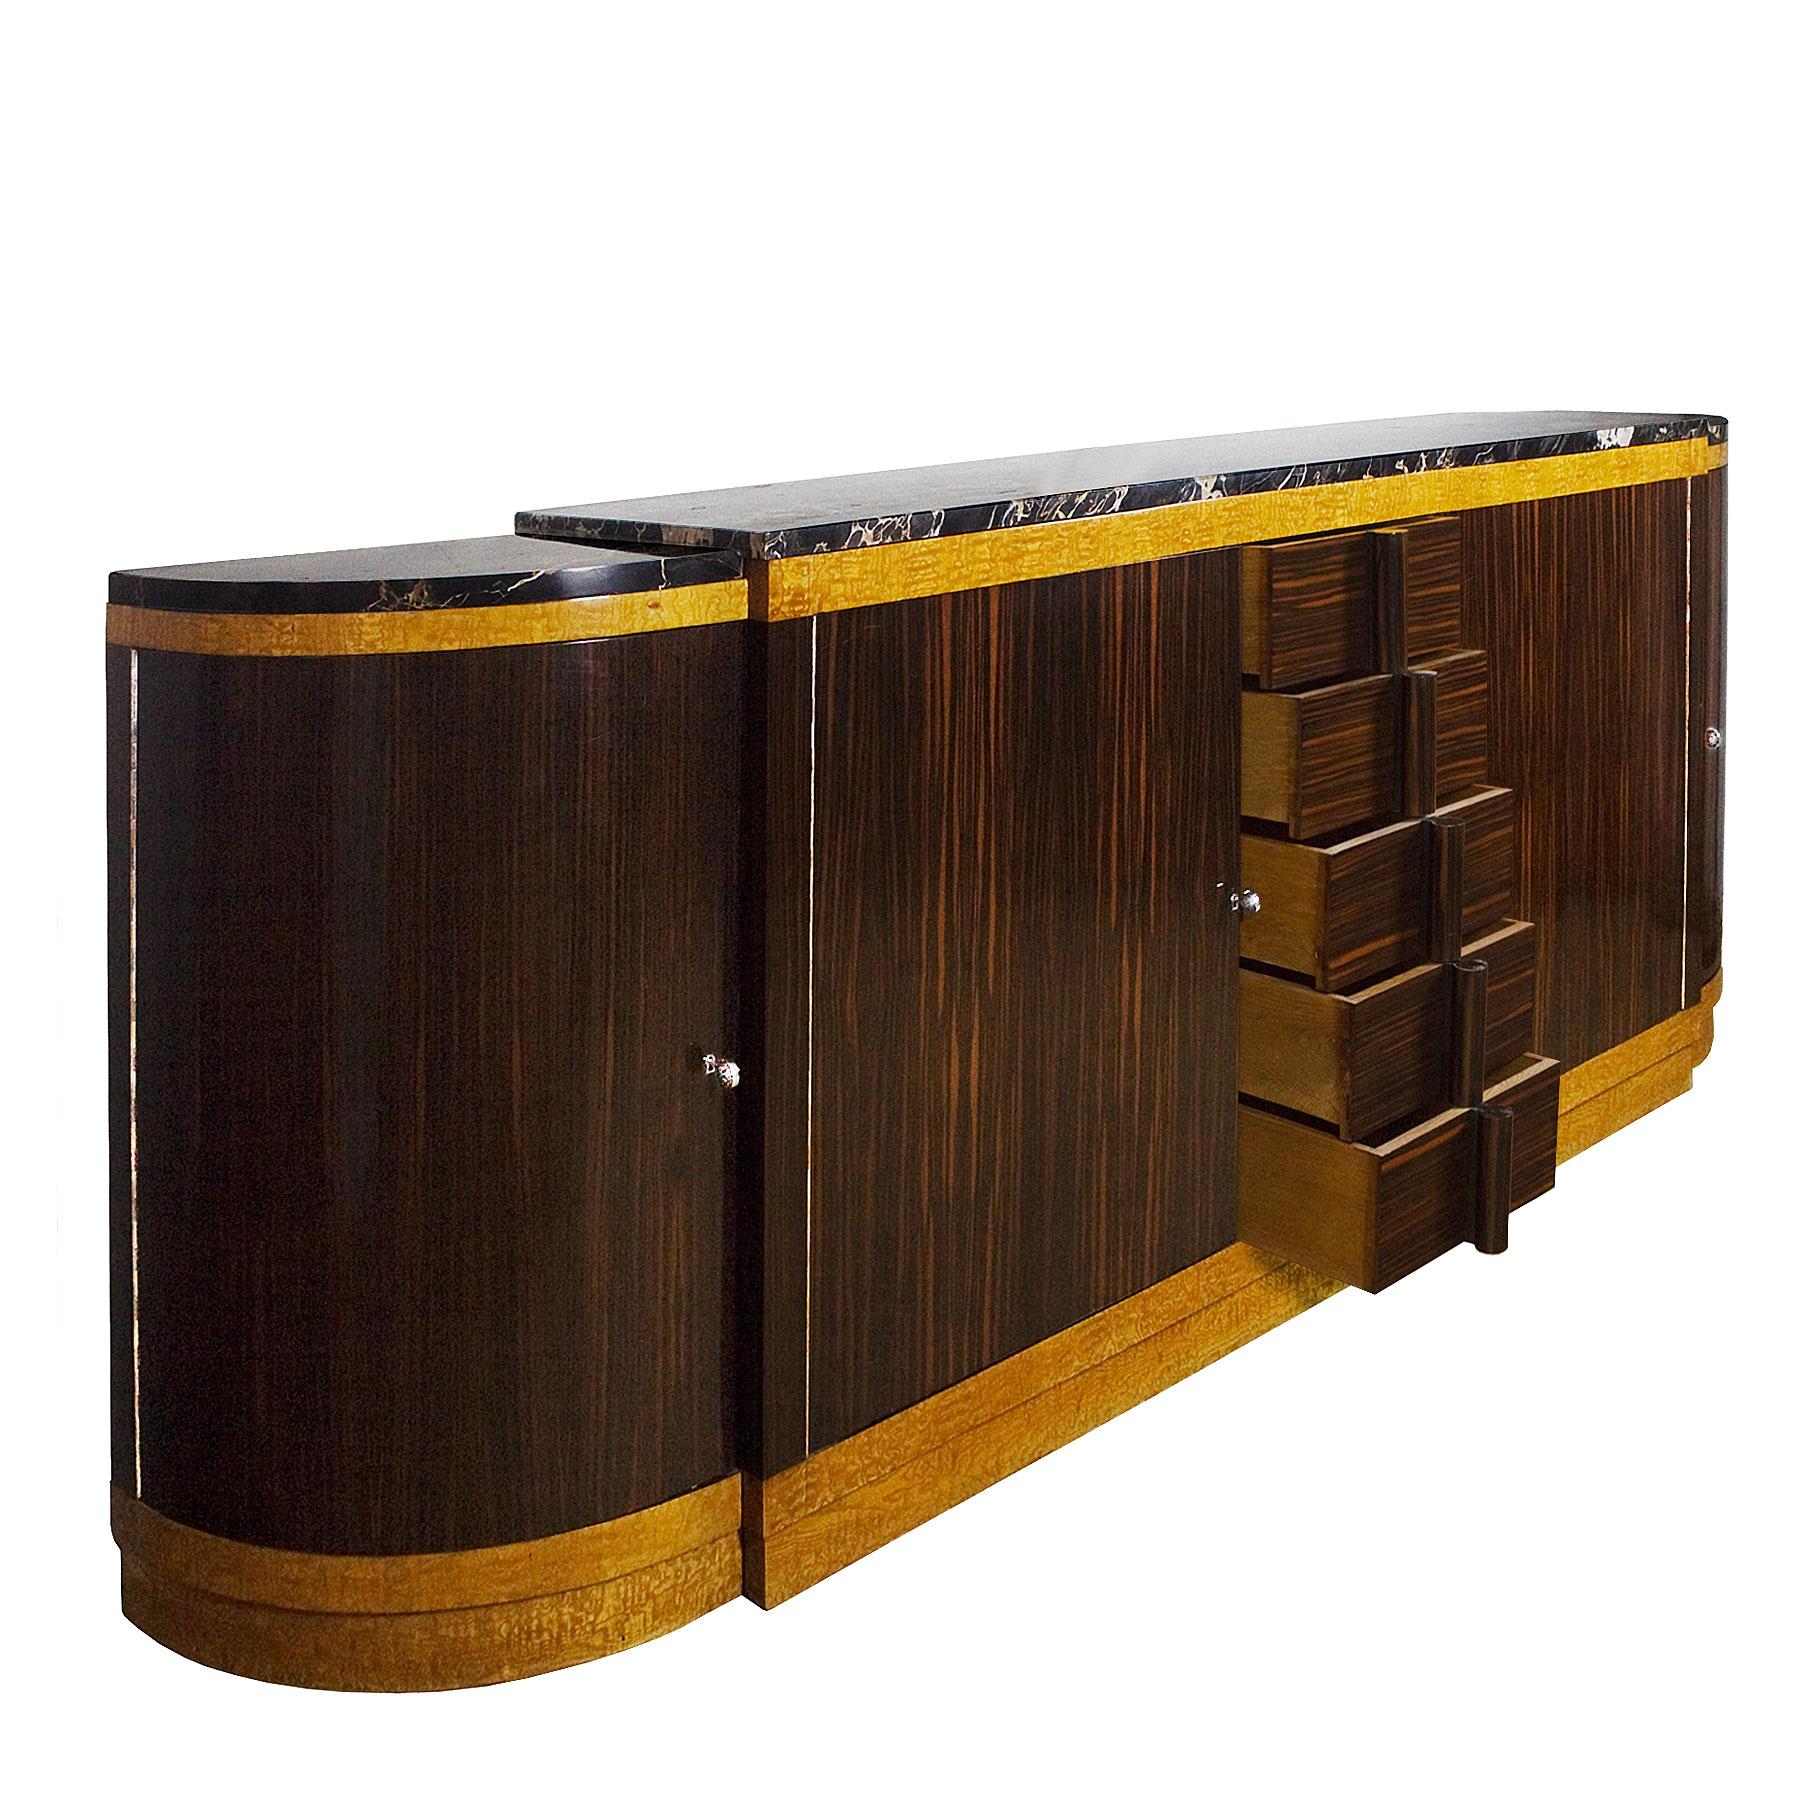 Marble Rounded Art Deco Sideboard by Jean Fauré, Macassar Ebony - France, 1930s For Sale